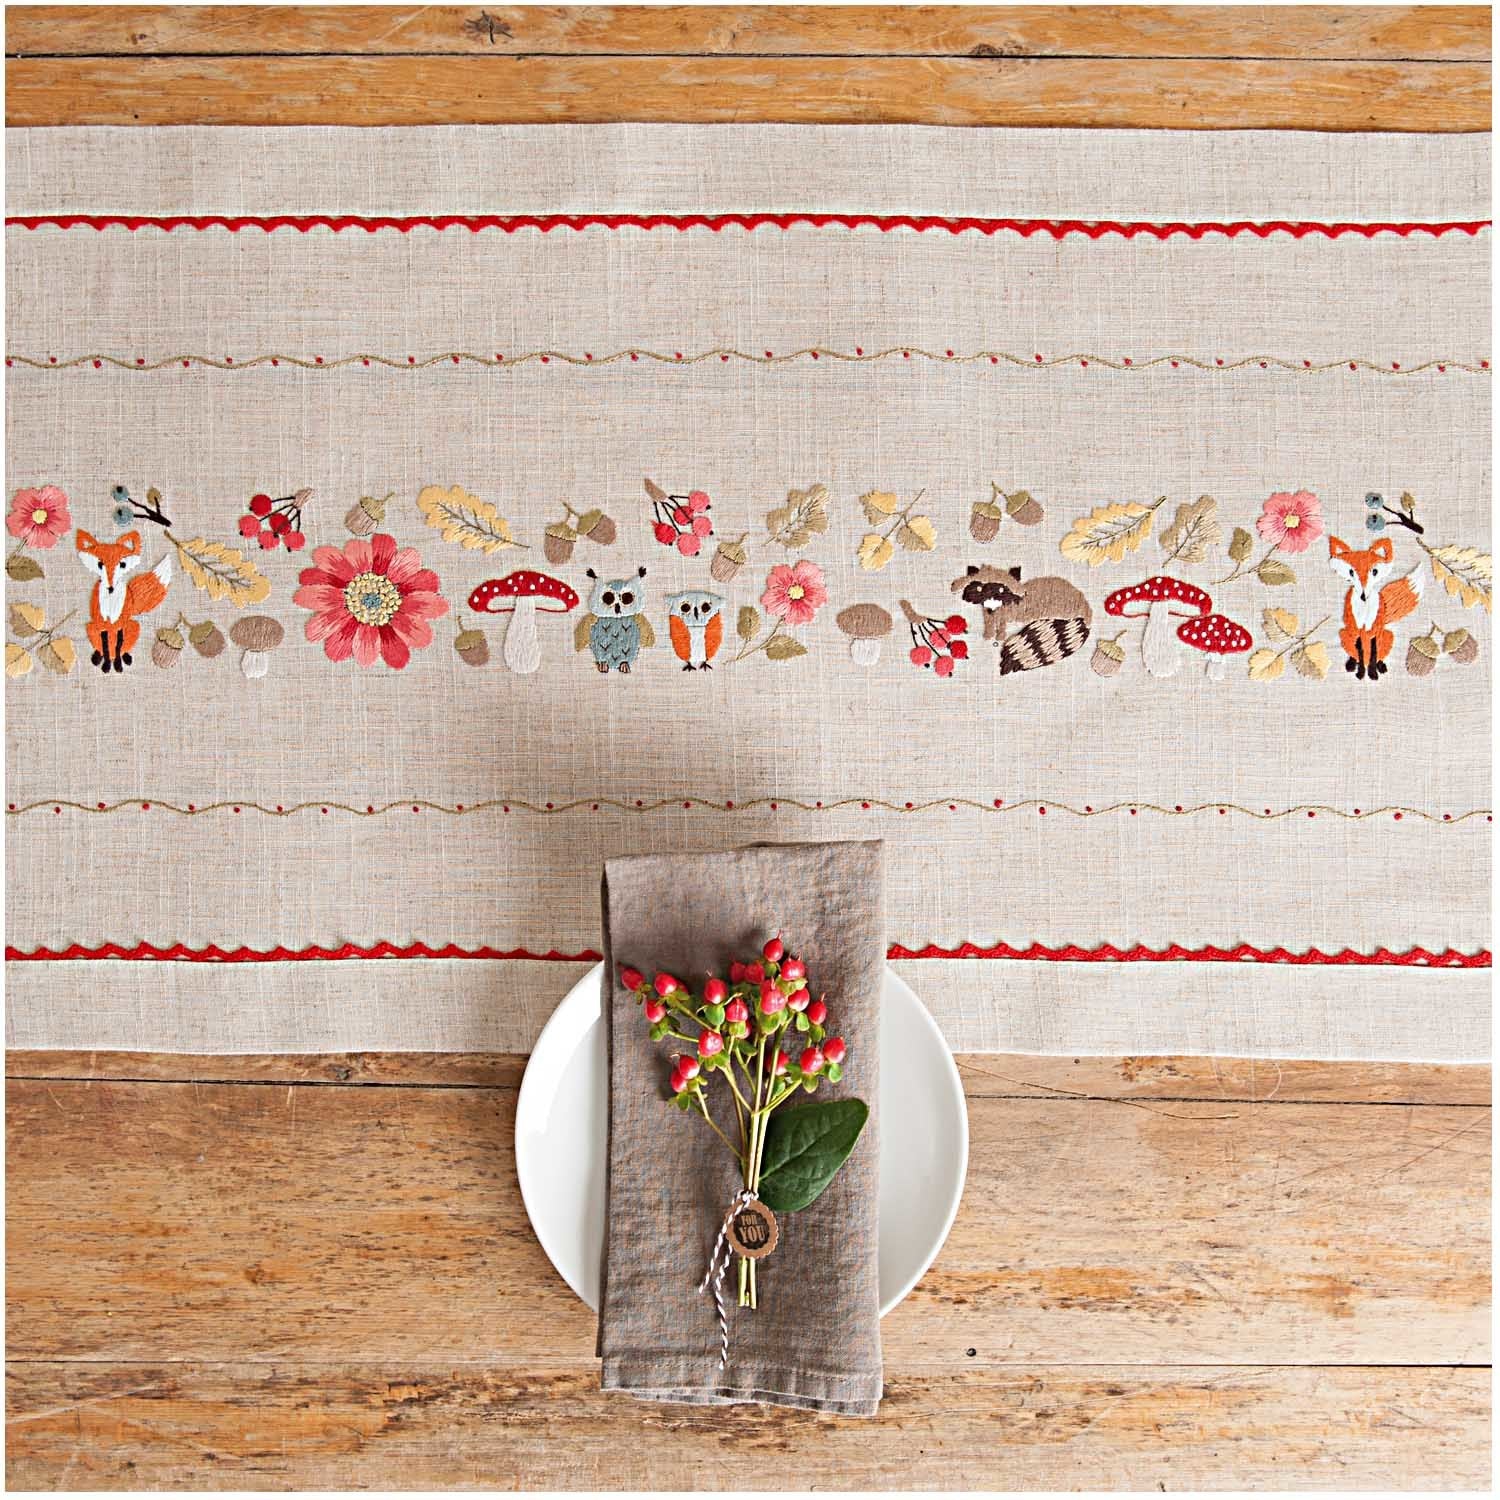 Rico Forest animals embroidery kit table runner